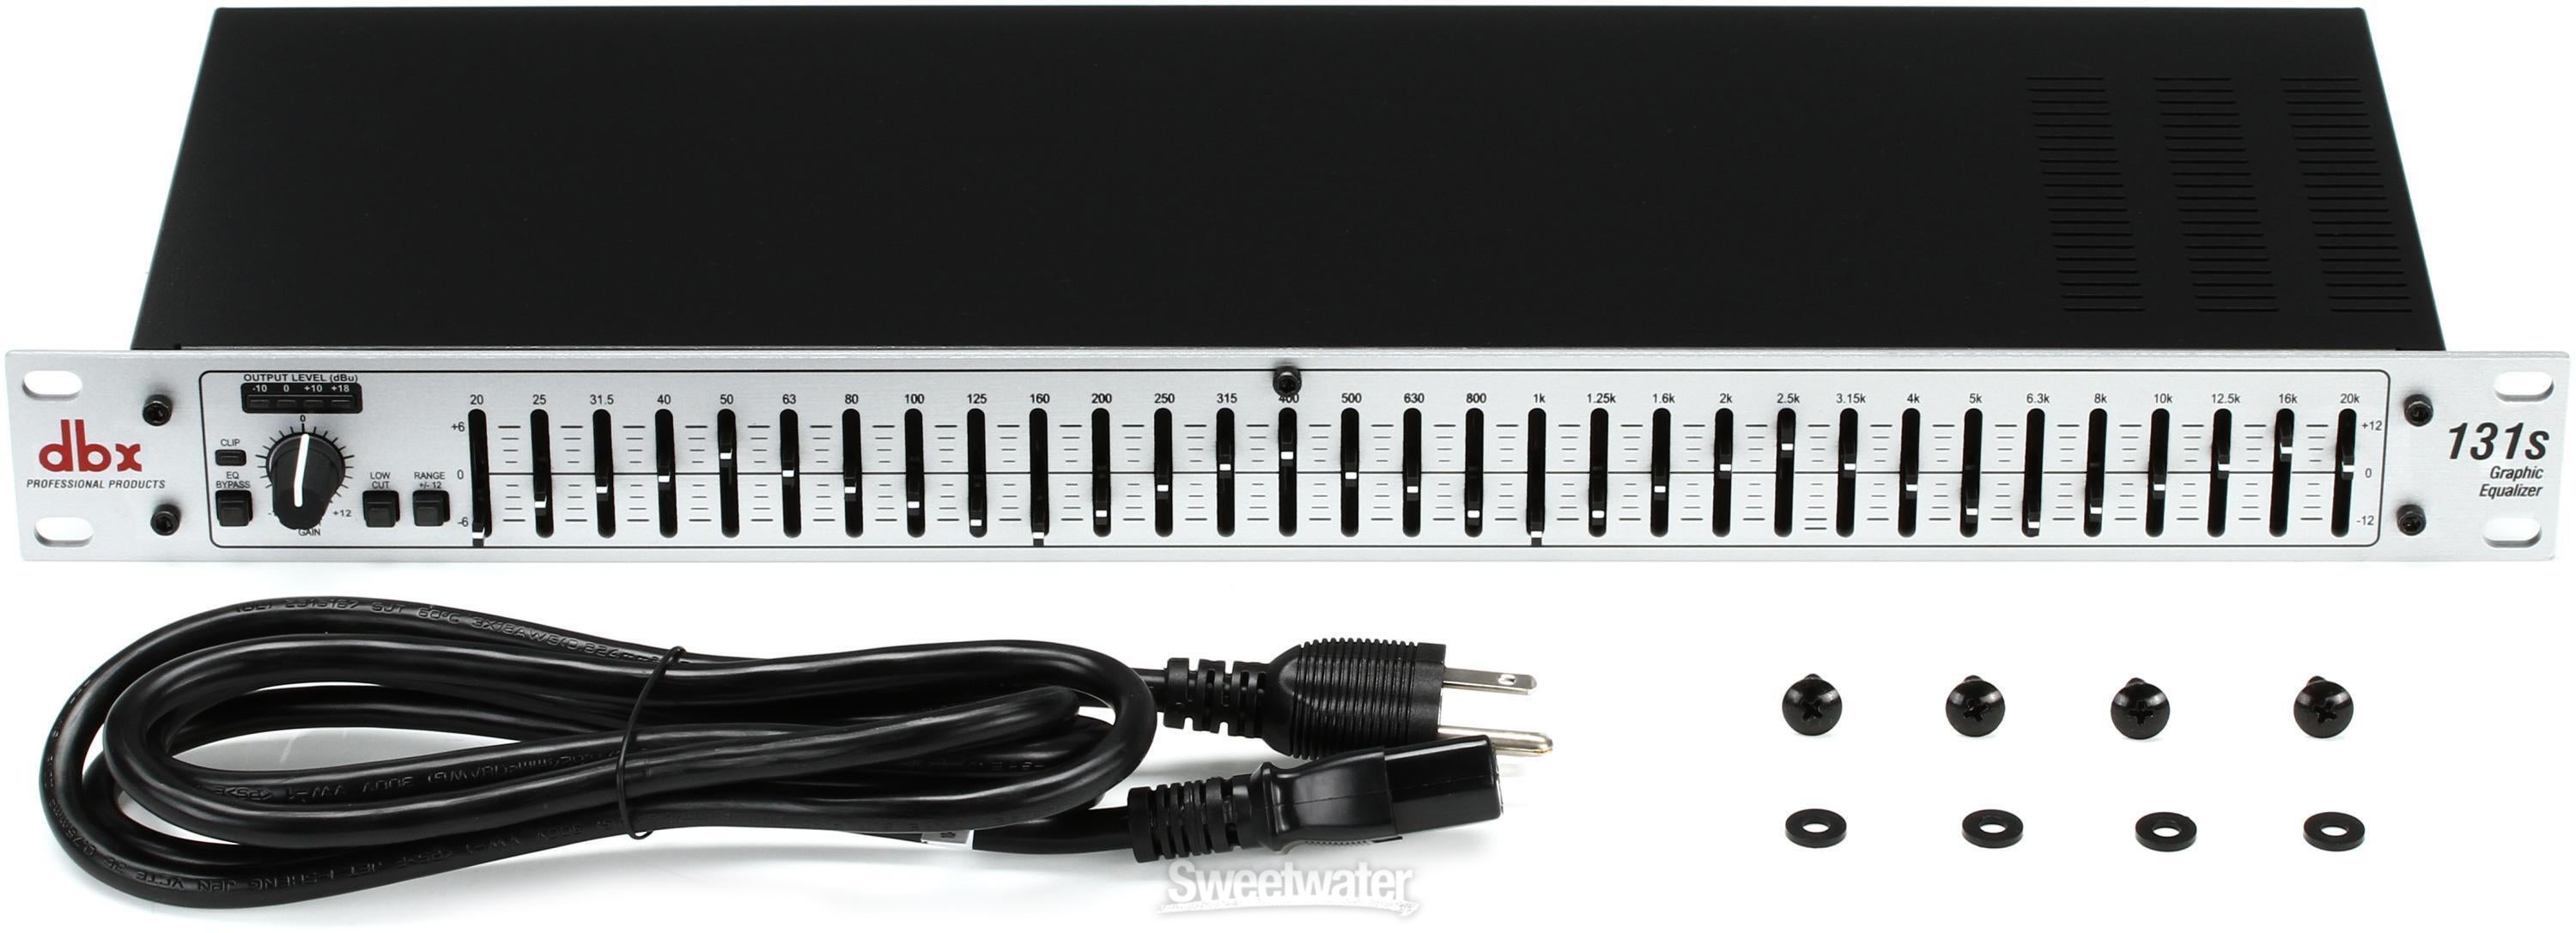 dbx 131s 31-band Graphic Equalizer | Sweetwater